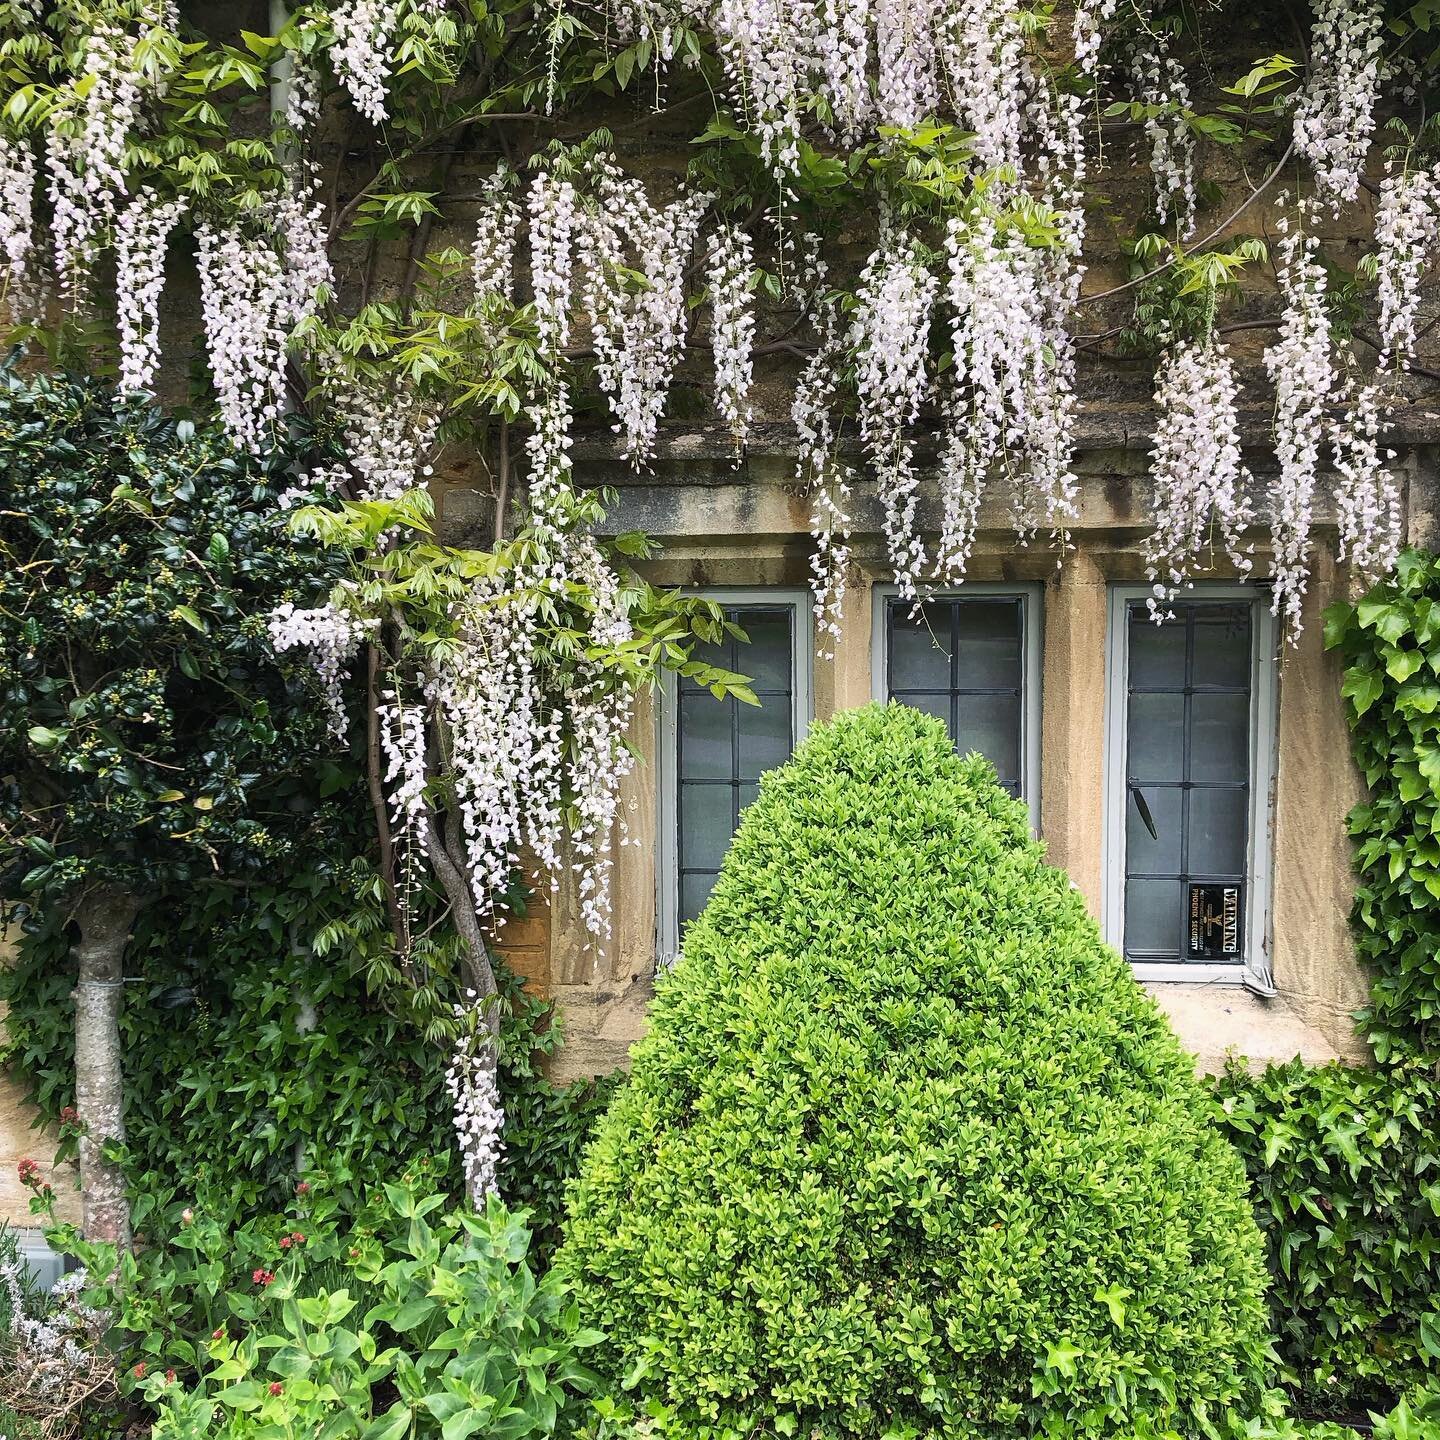 If only this was smell-o-vision. The fragrance of this wisteria is to die for. If you&rsquo;re in the Cotswolds why not drop in to Lower Slaughter for a quick waft?